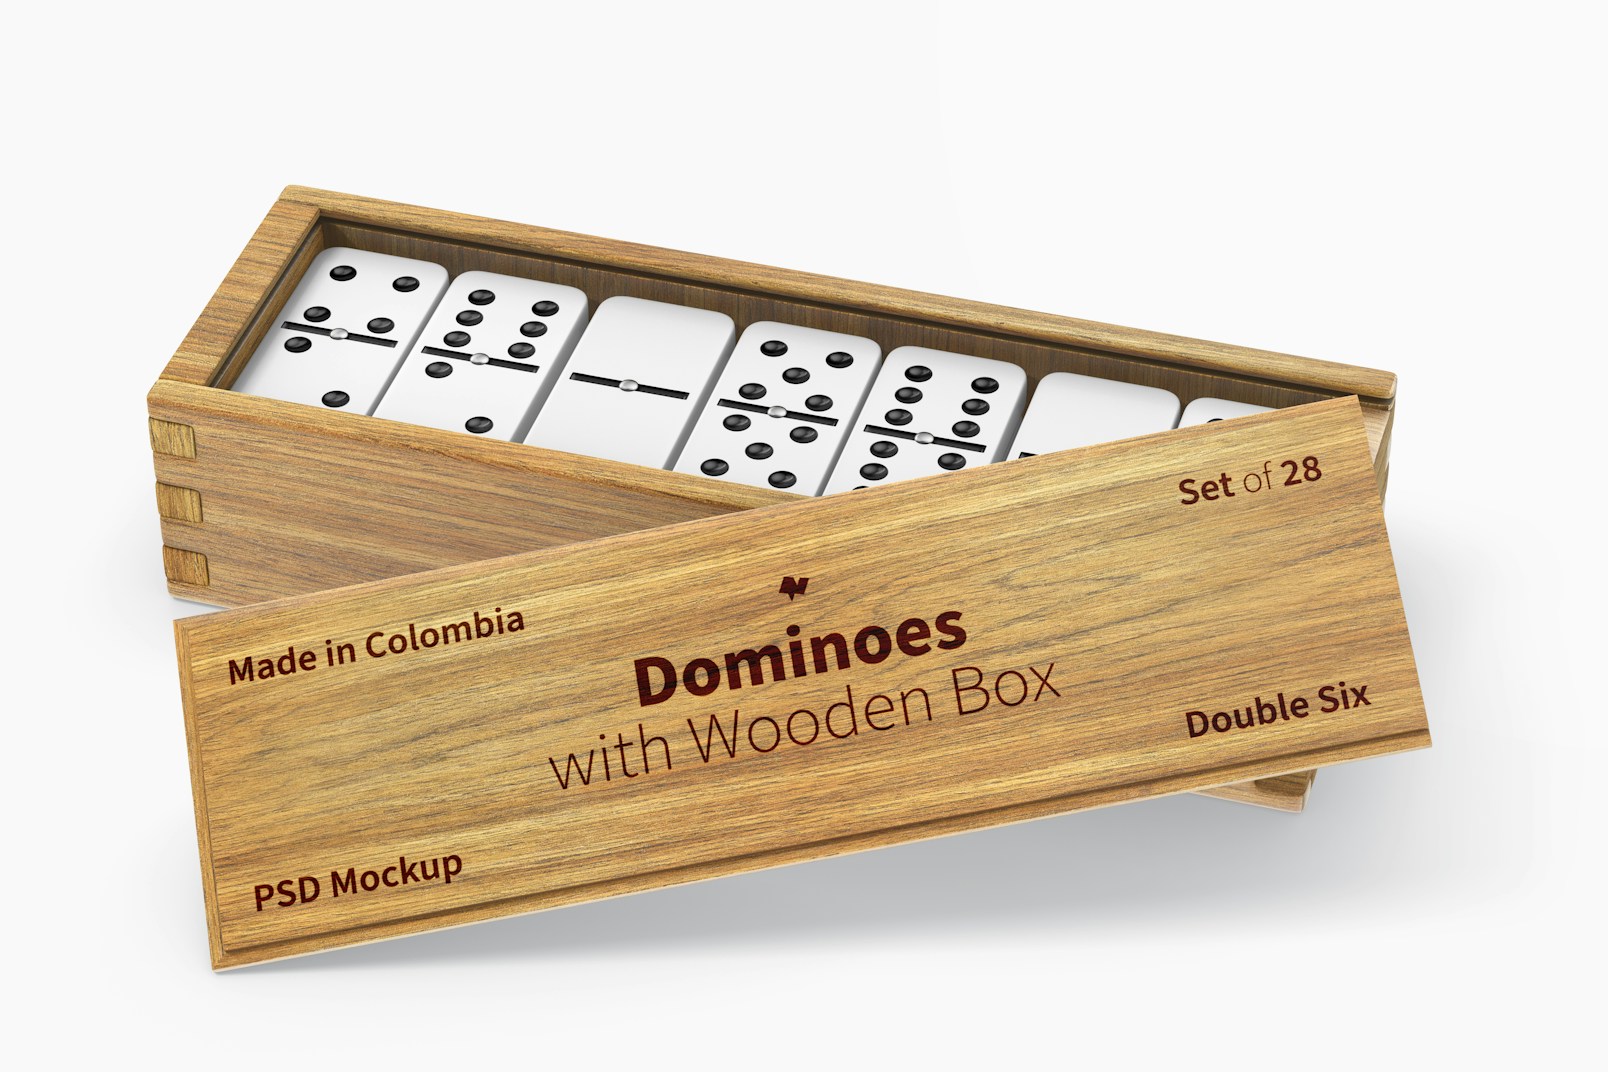 Dominoes with Wooden Box Mockup